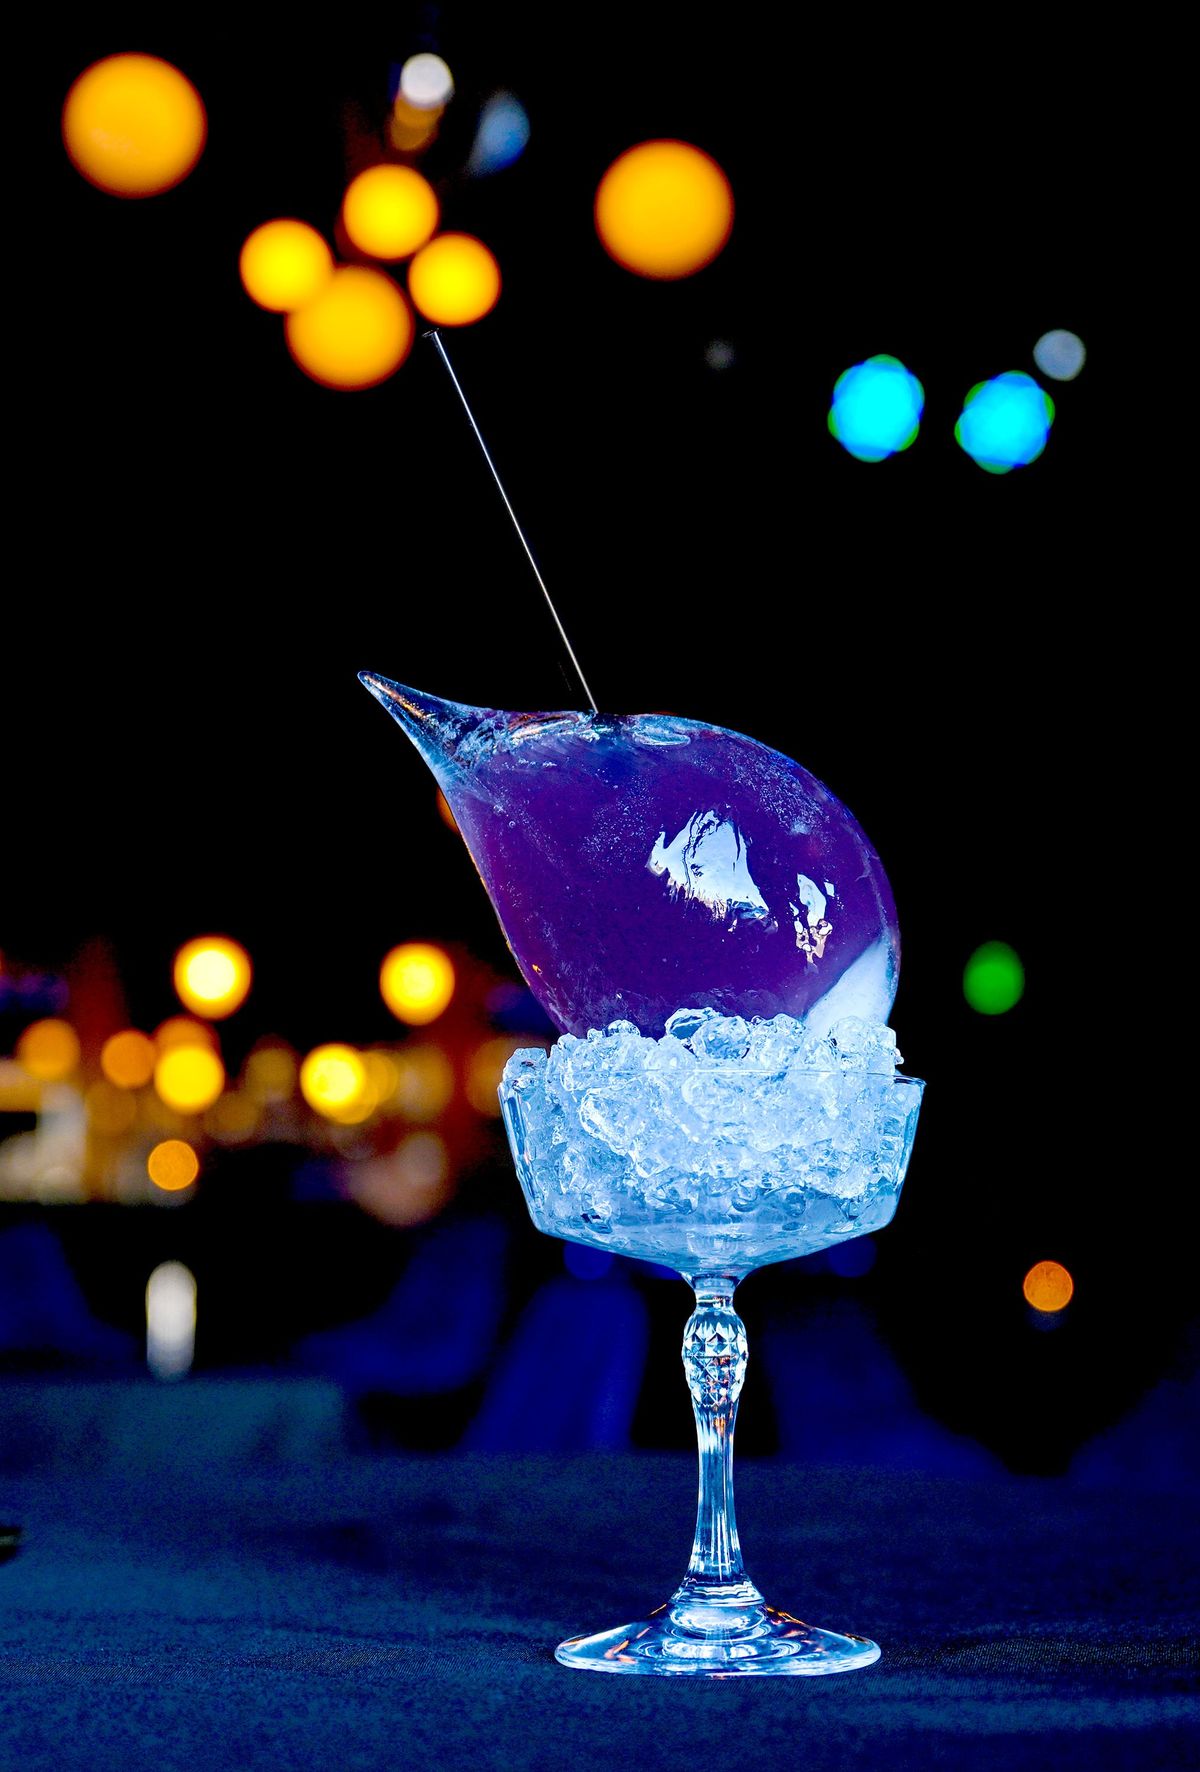 The Purple Teardrop drink made with Absolut Elyx and Blue Curaçao is photographed Nov. 28 at the Iolite Lounge in Spokane Valley.  (Kathy Plonka/The Spokesman-Review)